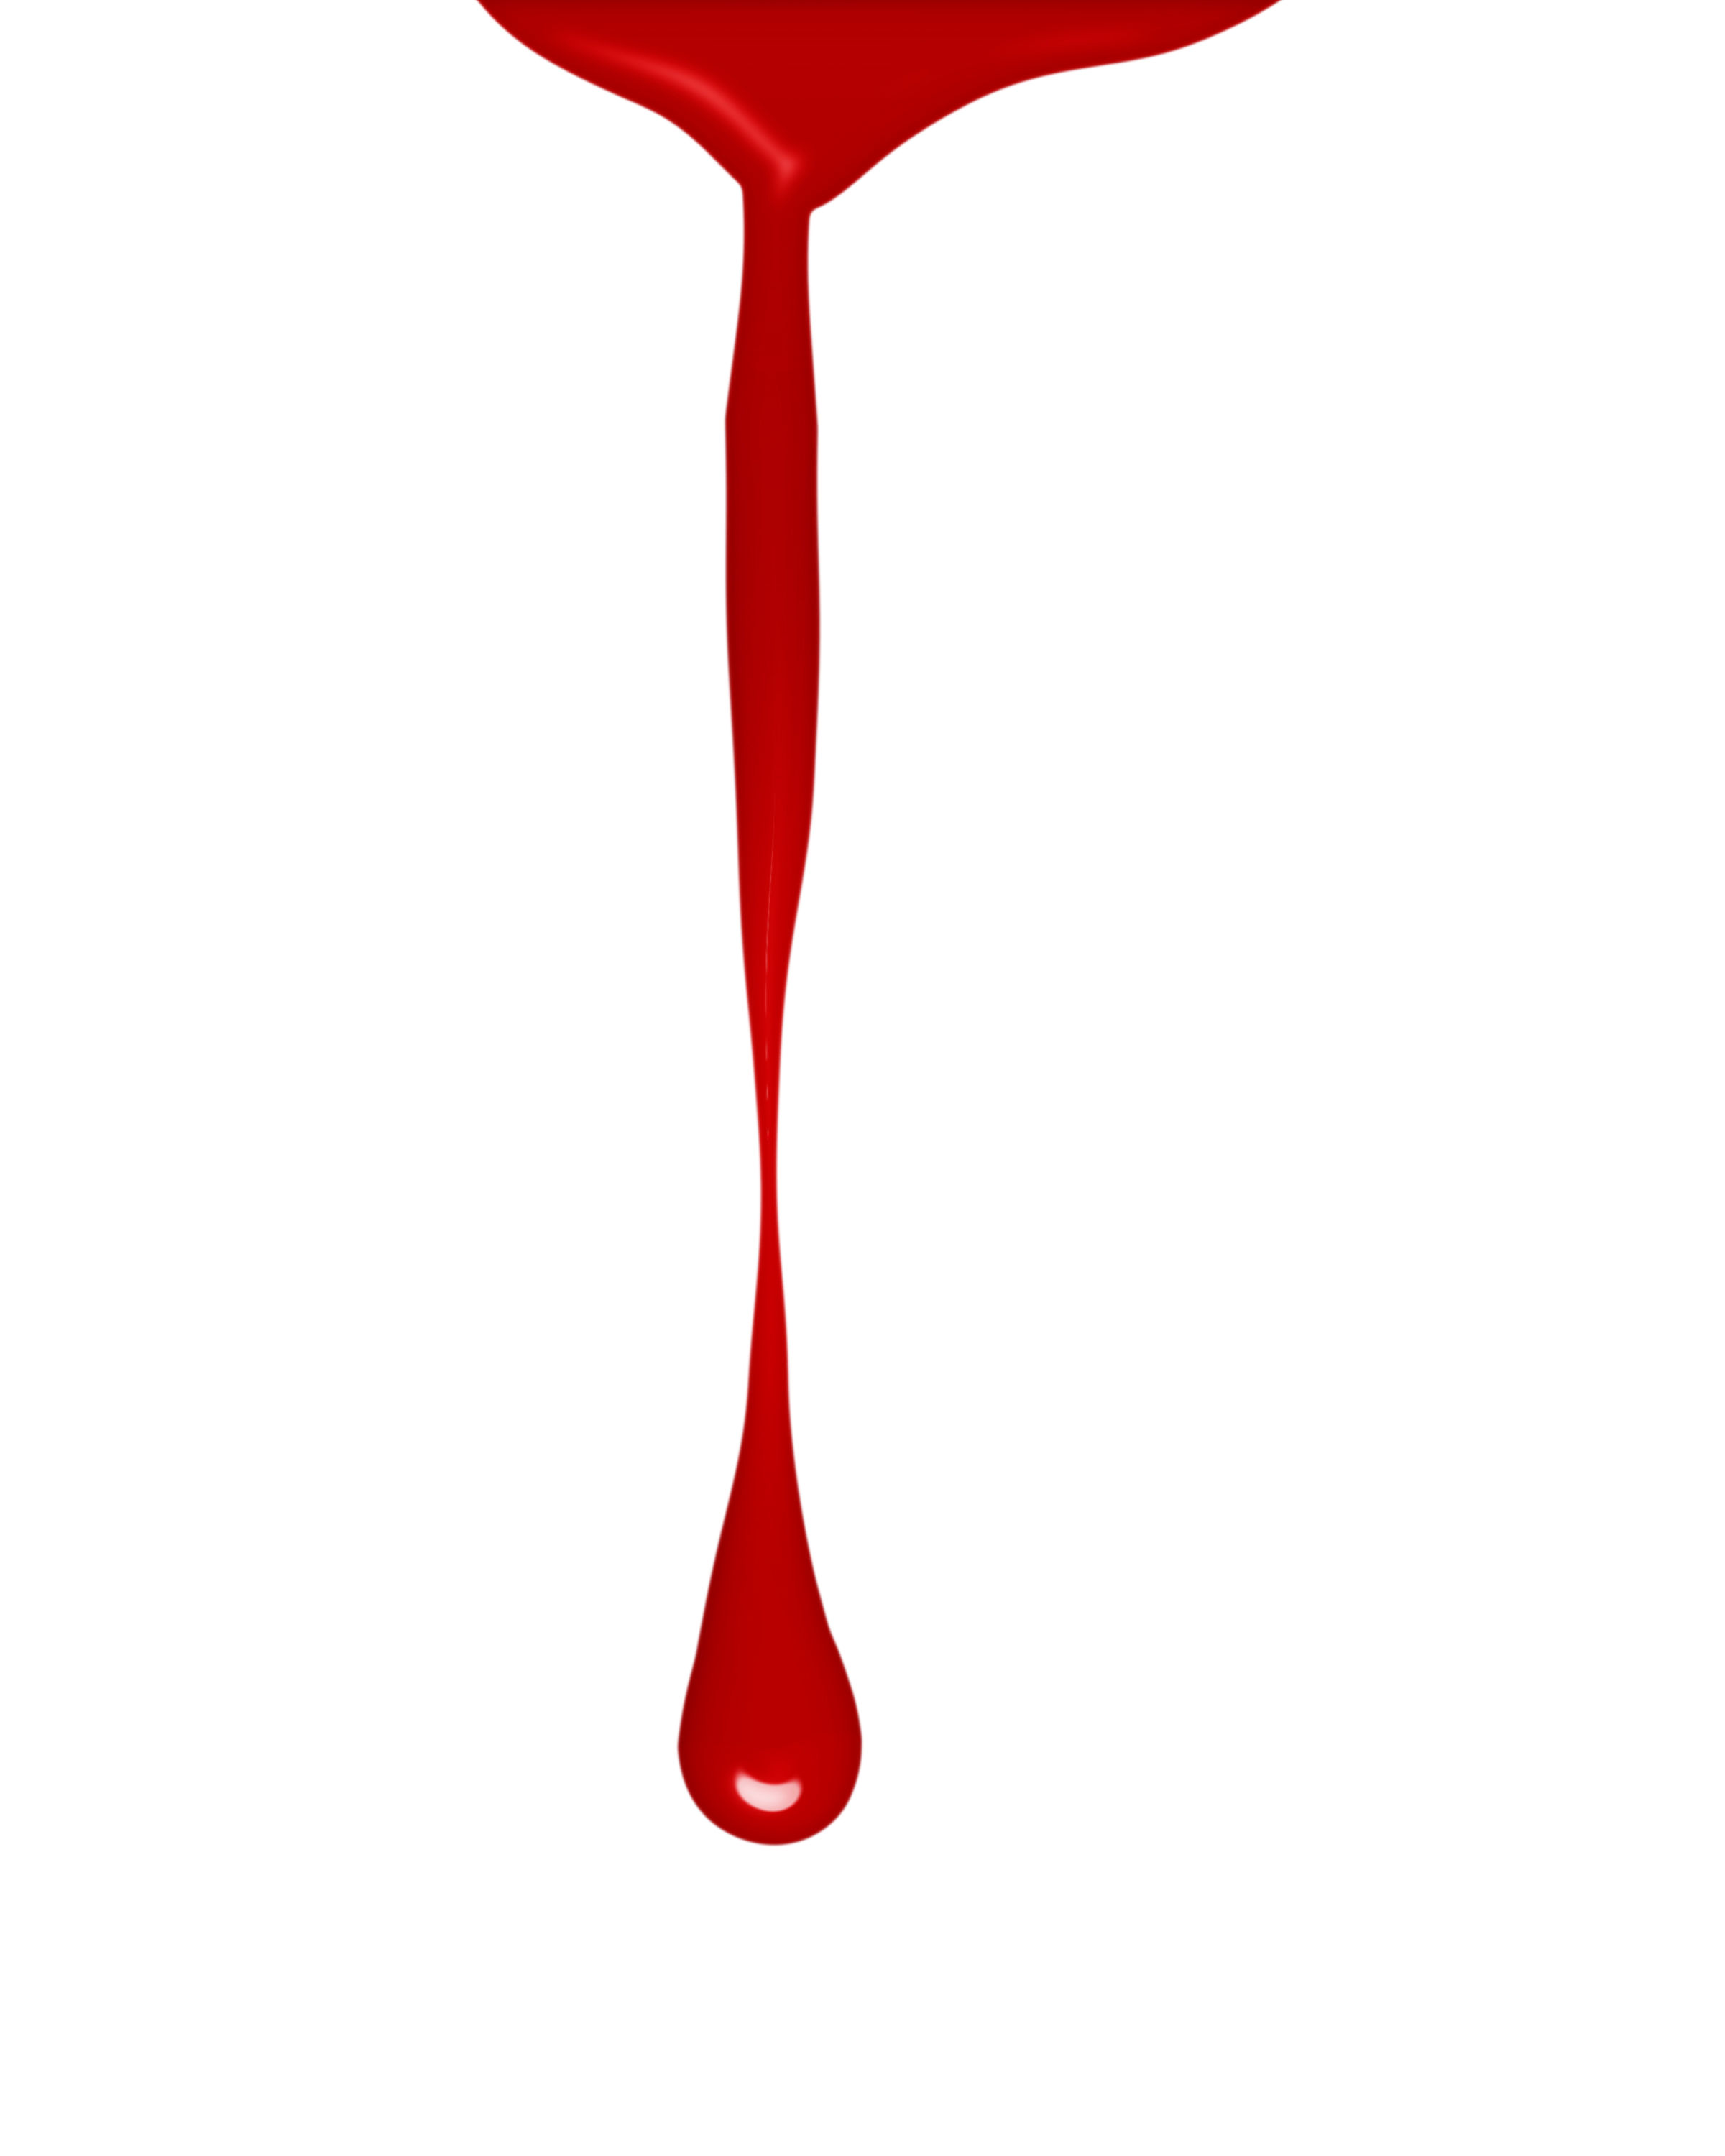 free clipart of blood drop - photo #45